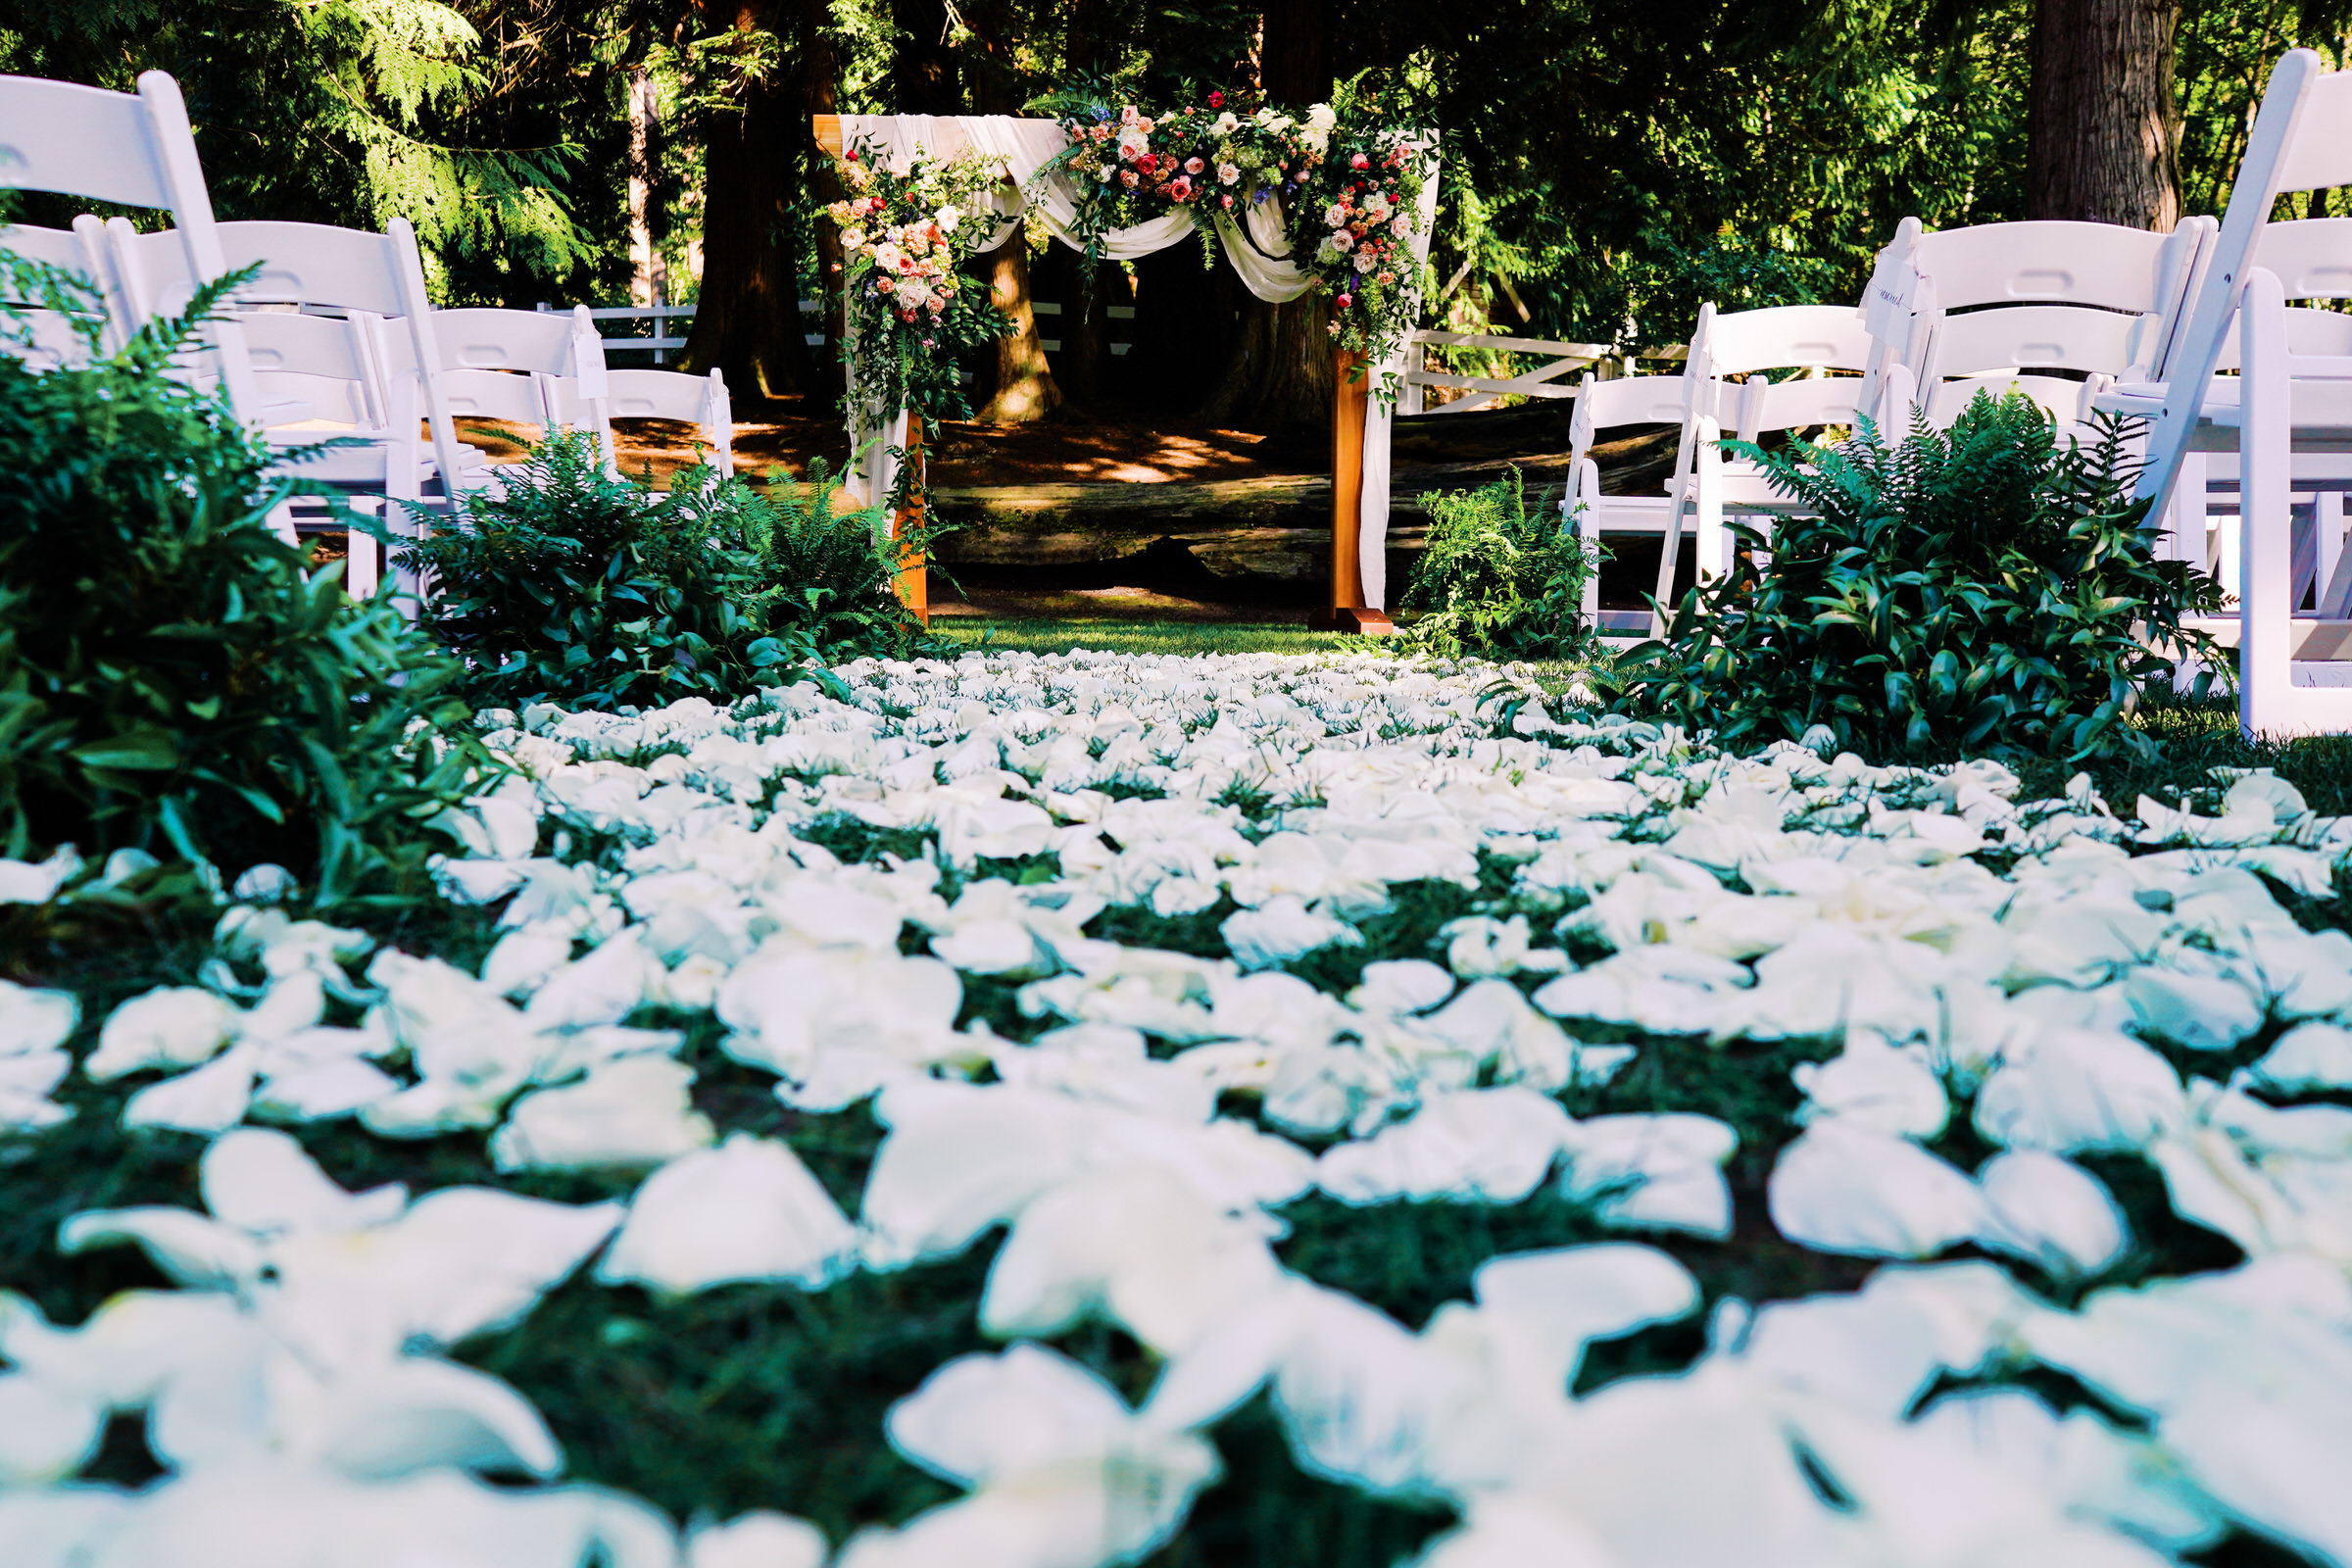 Chateau Lil Weddings: Styled and planned by Wild Sky Events